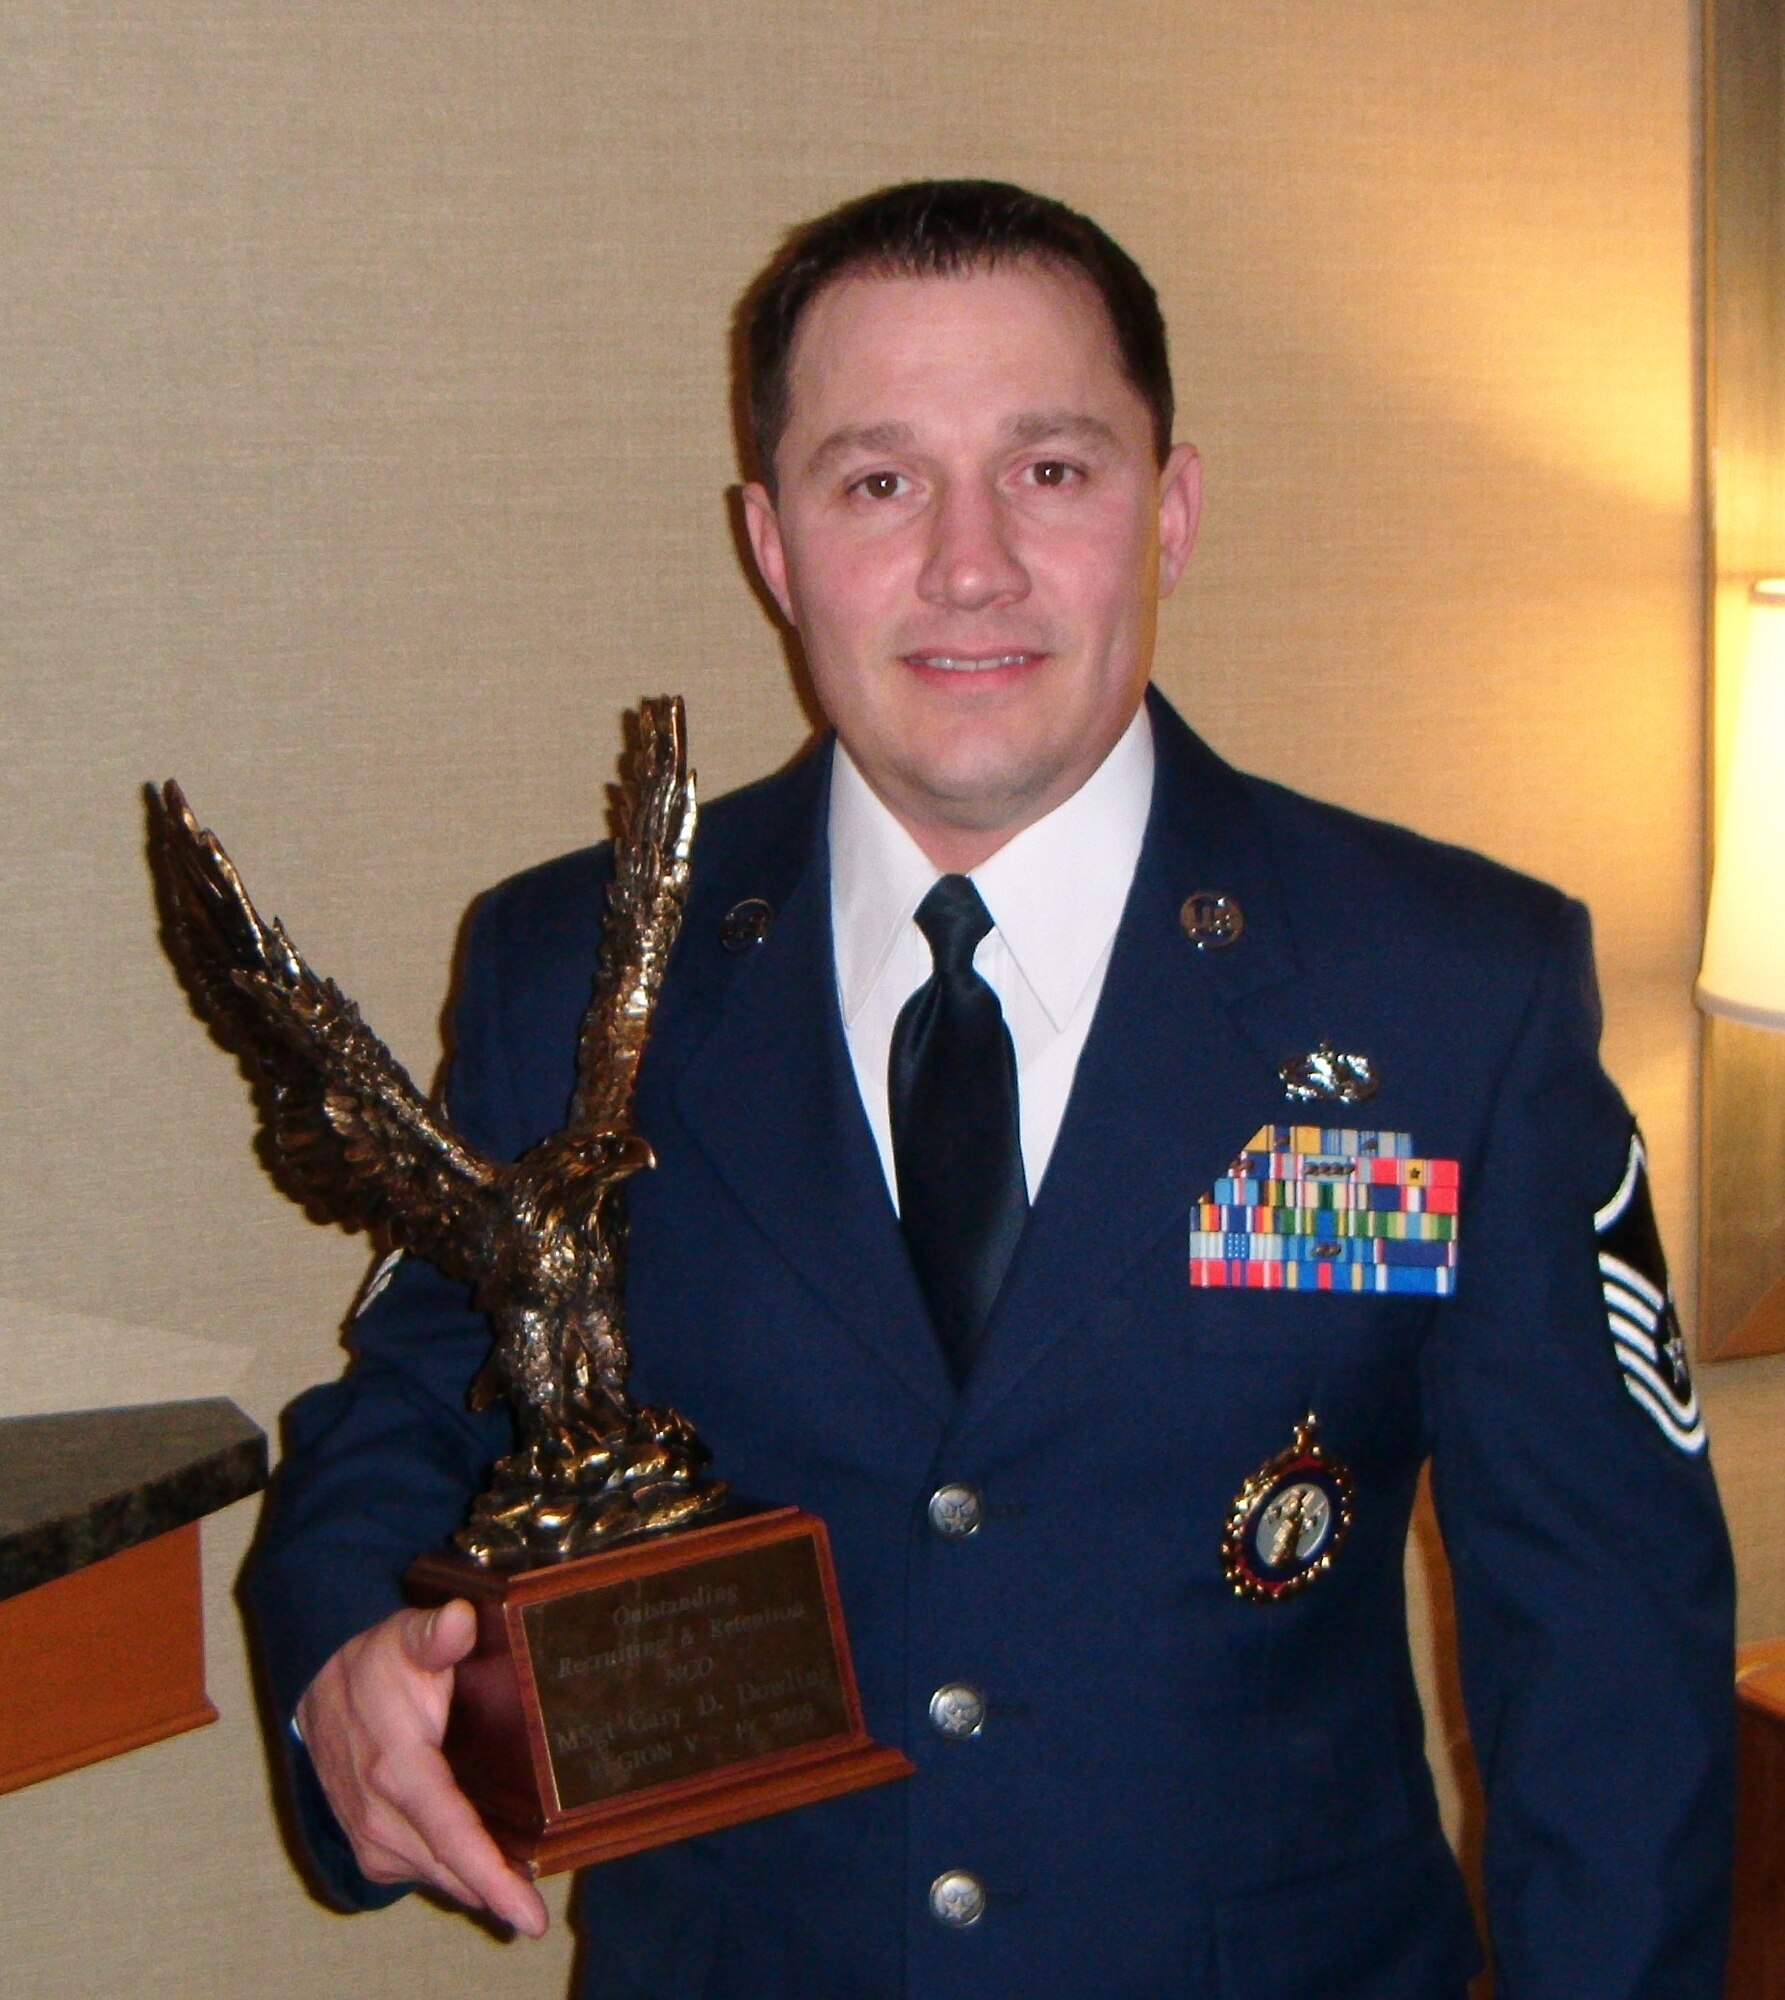 Master Sgt. Gary Dowling displays the trophy he received during a recruiting and retention workshop  awards banquet in Dallas Feb. 22, 2010.  Dowling was named Recruiting/Retention Noncommissioned Officer of the Year. (Photo courtesy of Master Sgt. Gary Dowling)